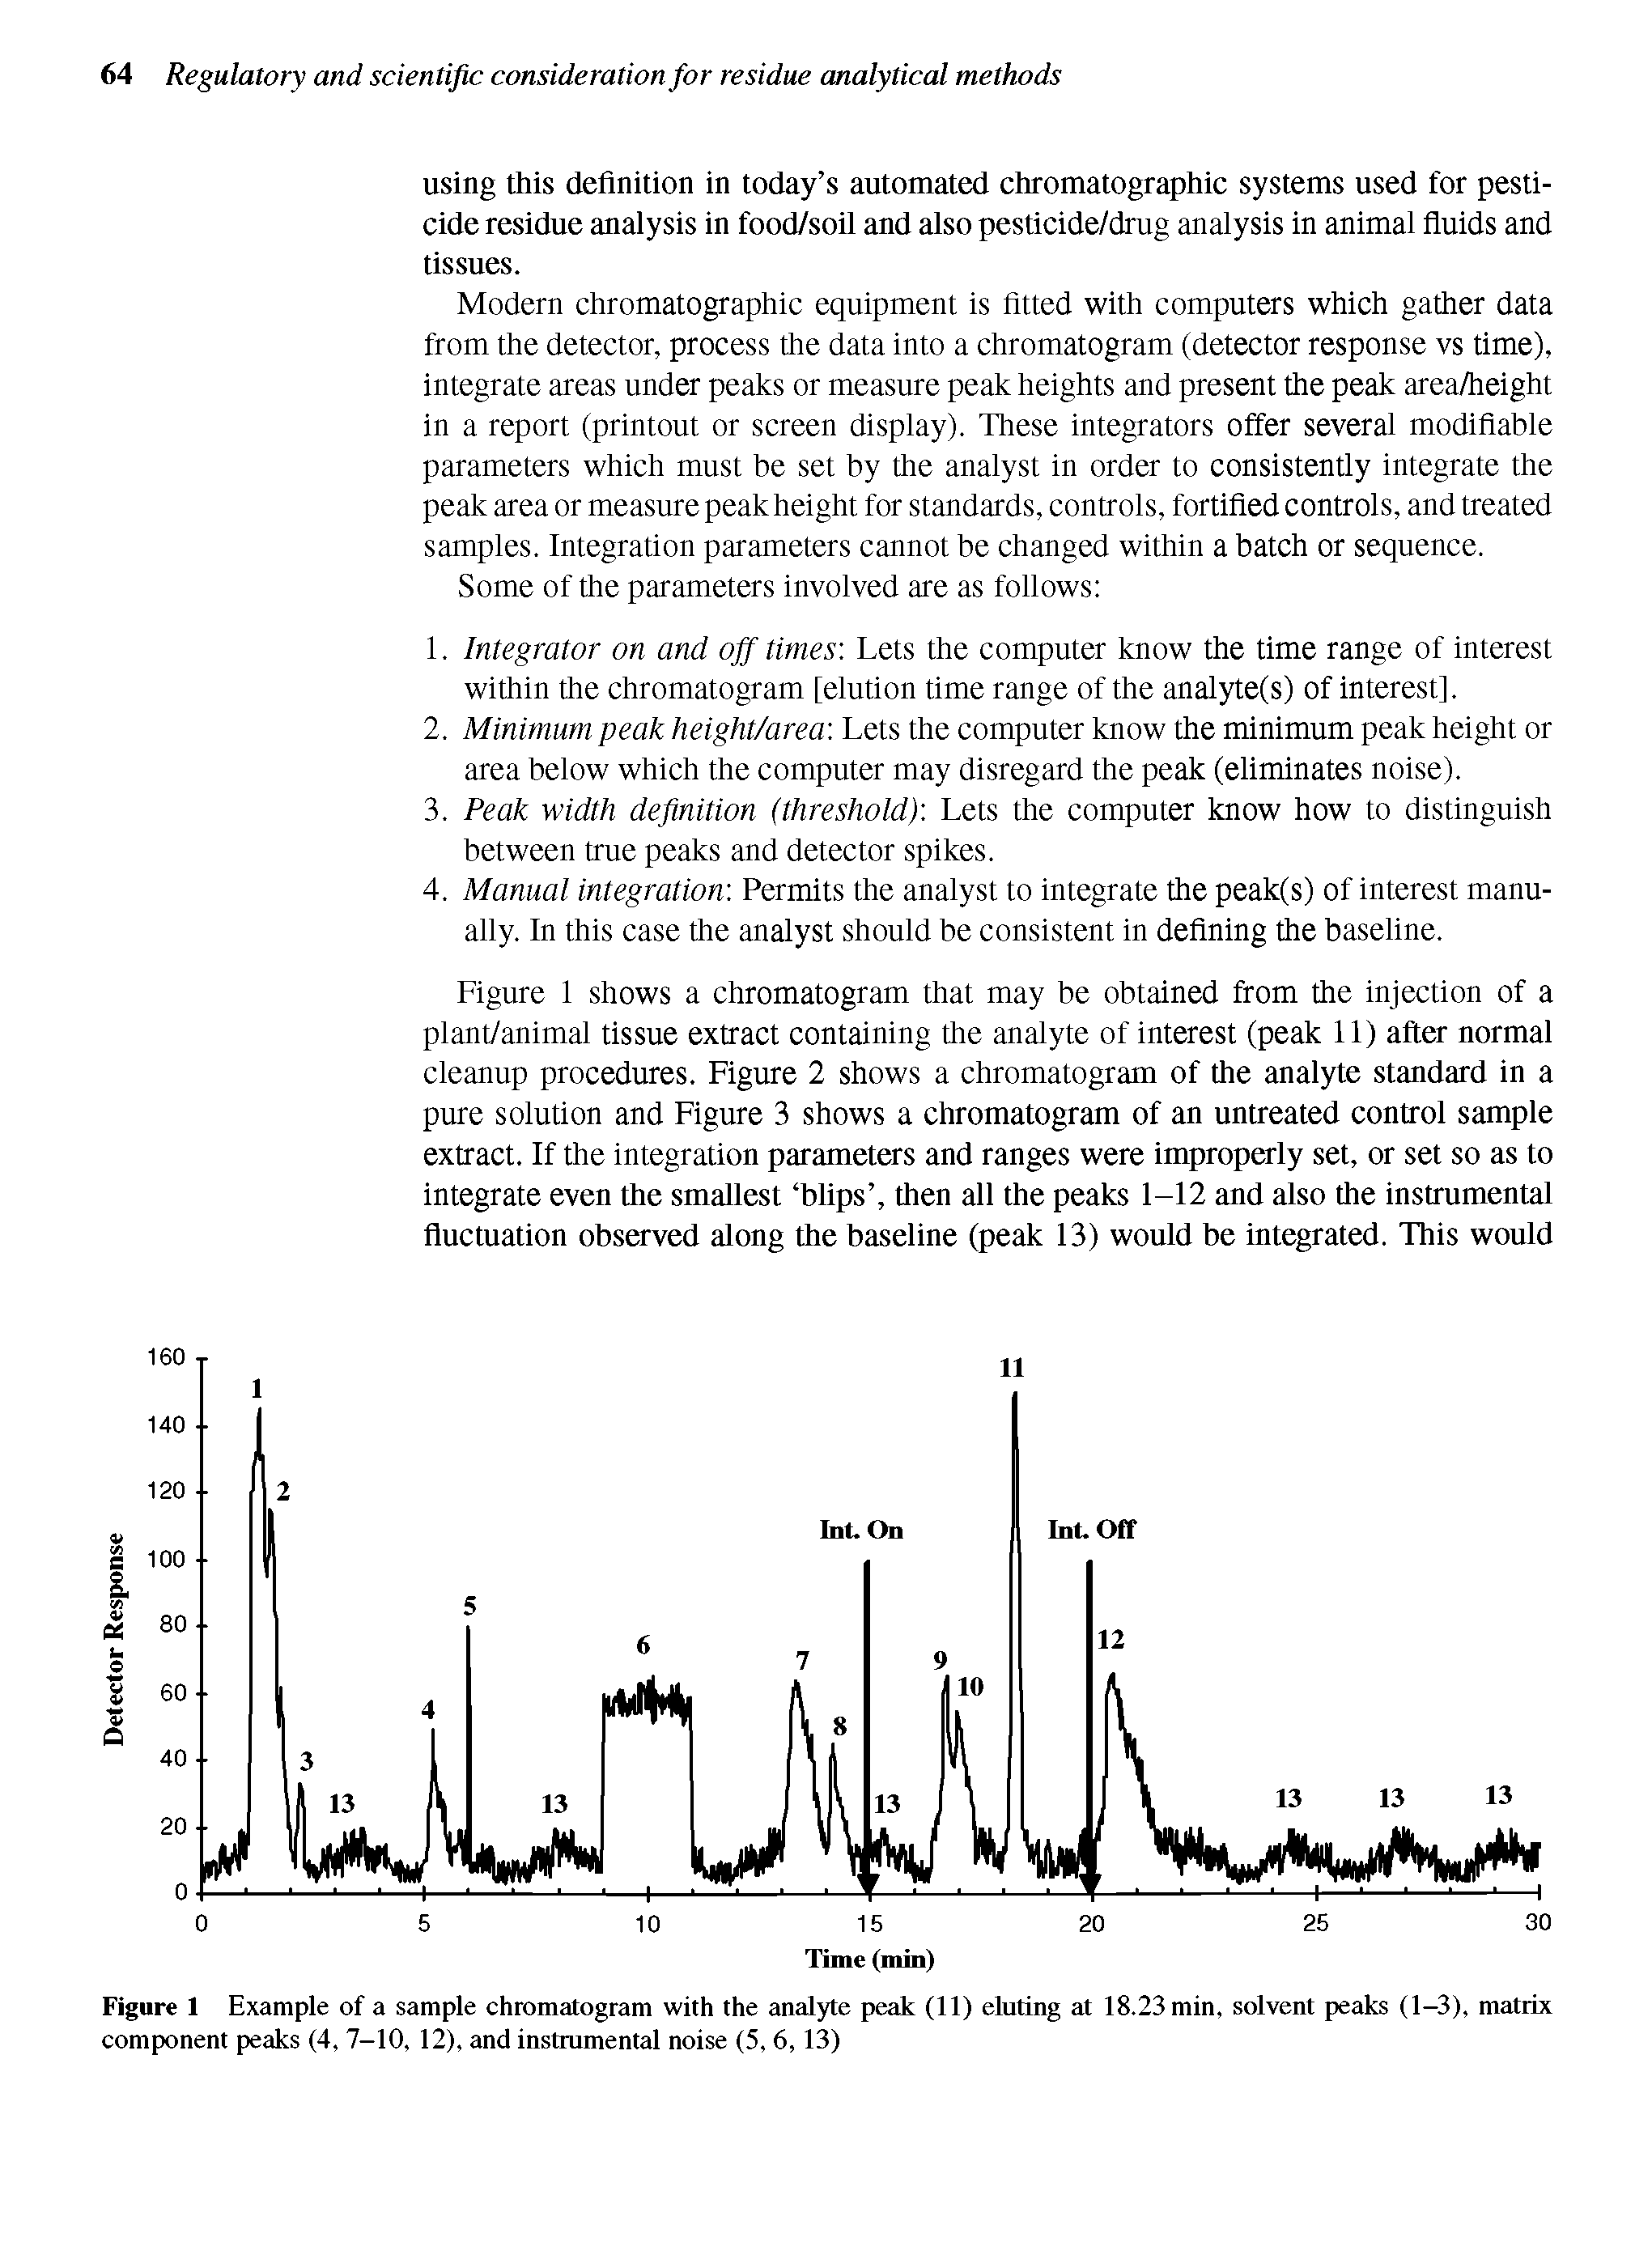 Figure 1 Example of a sample chromatogram with the analyte peak (11) eluting at 18.23 min, solvent peaks (1-3), matrix component peaks (4, 7-10, 12), and instrumental noise (5, 6,13)...